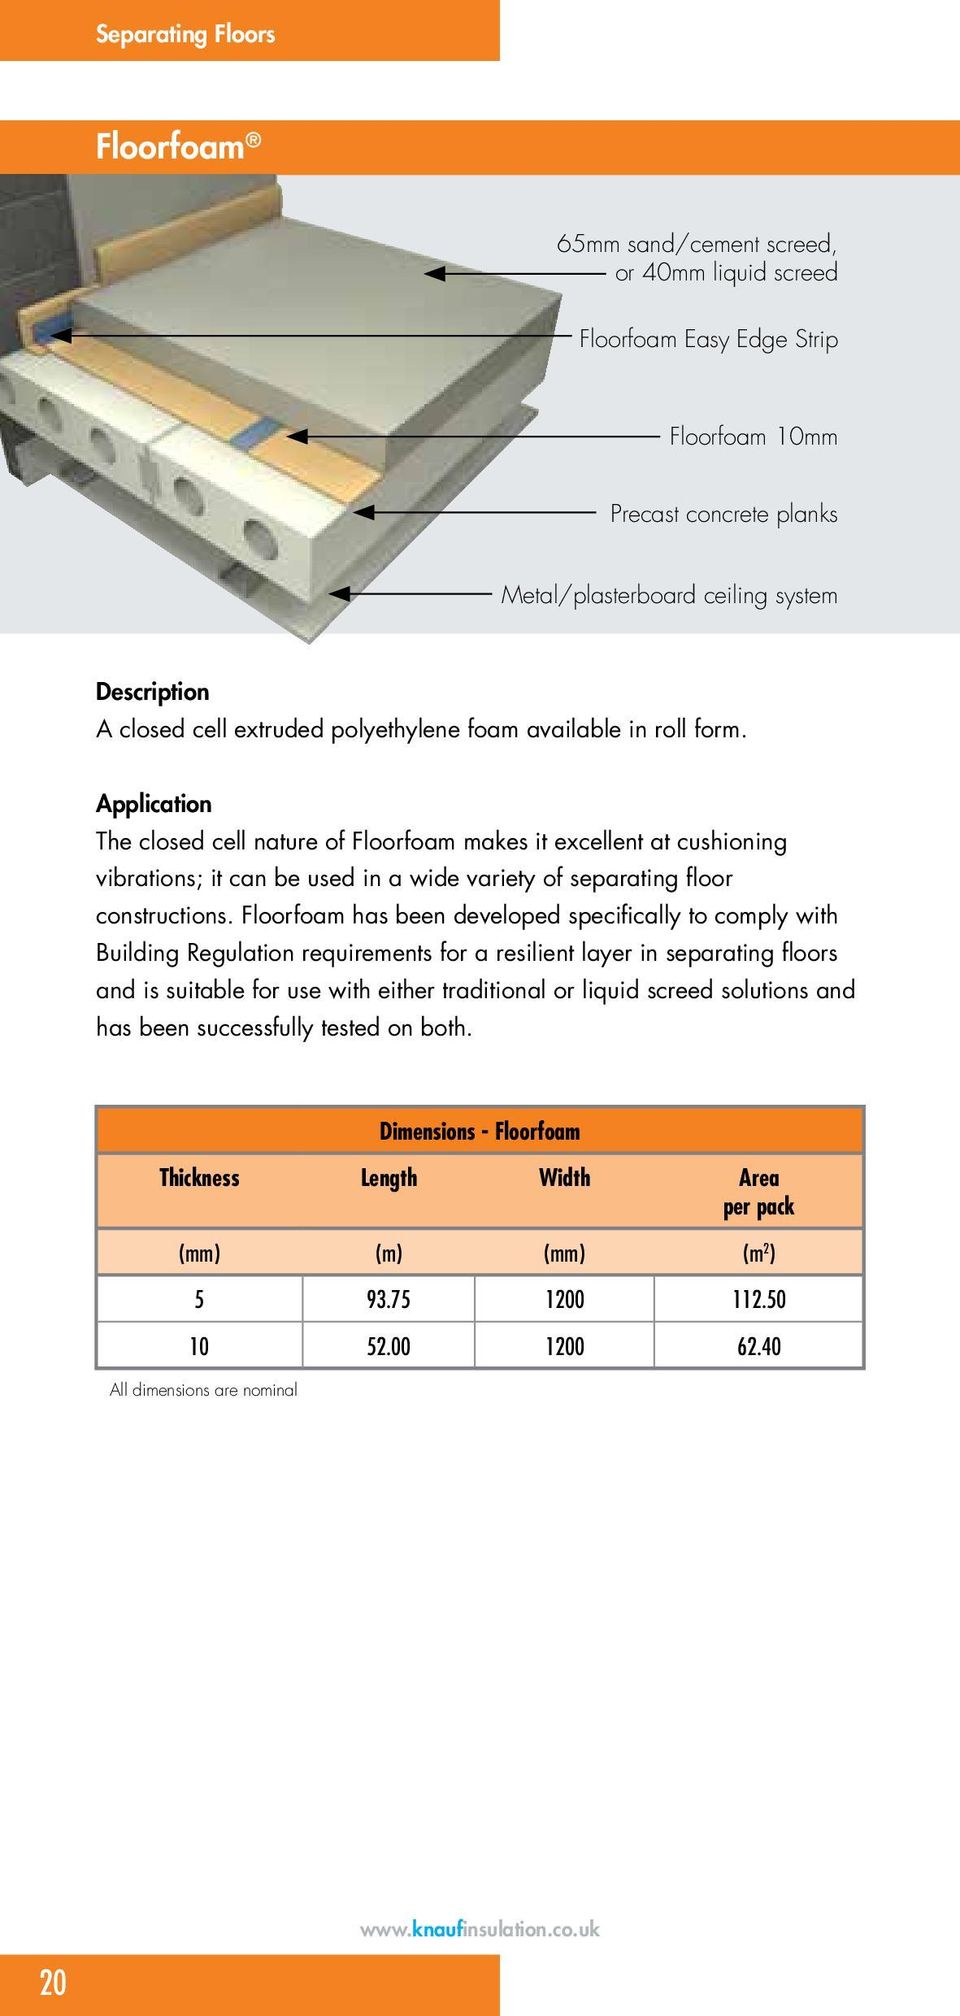 The closed cell nature of Floorfoam makes it excellent at cushioning vibrations; it can be used in a wide variety of separating floor constructions.